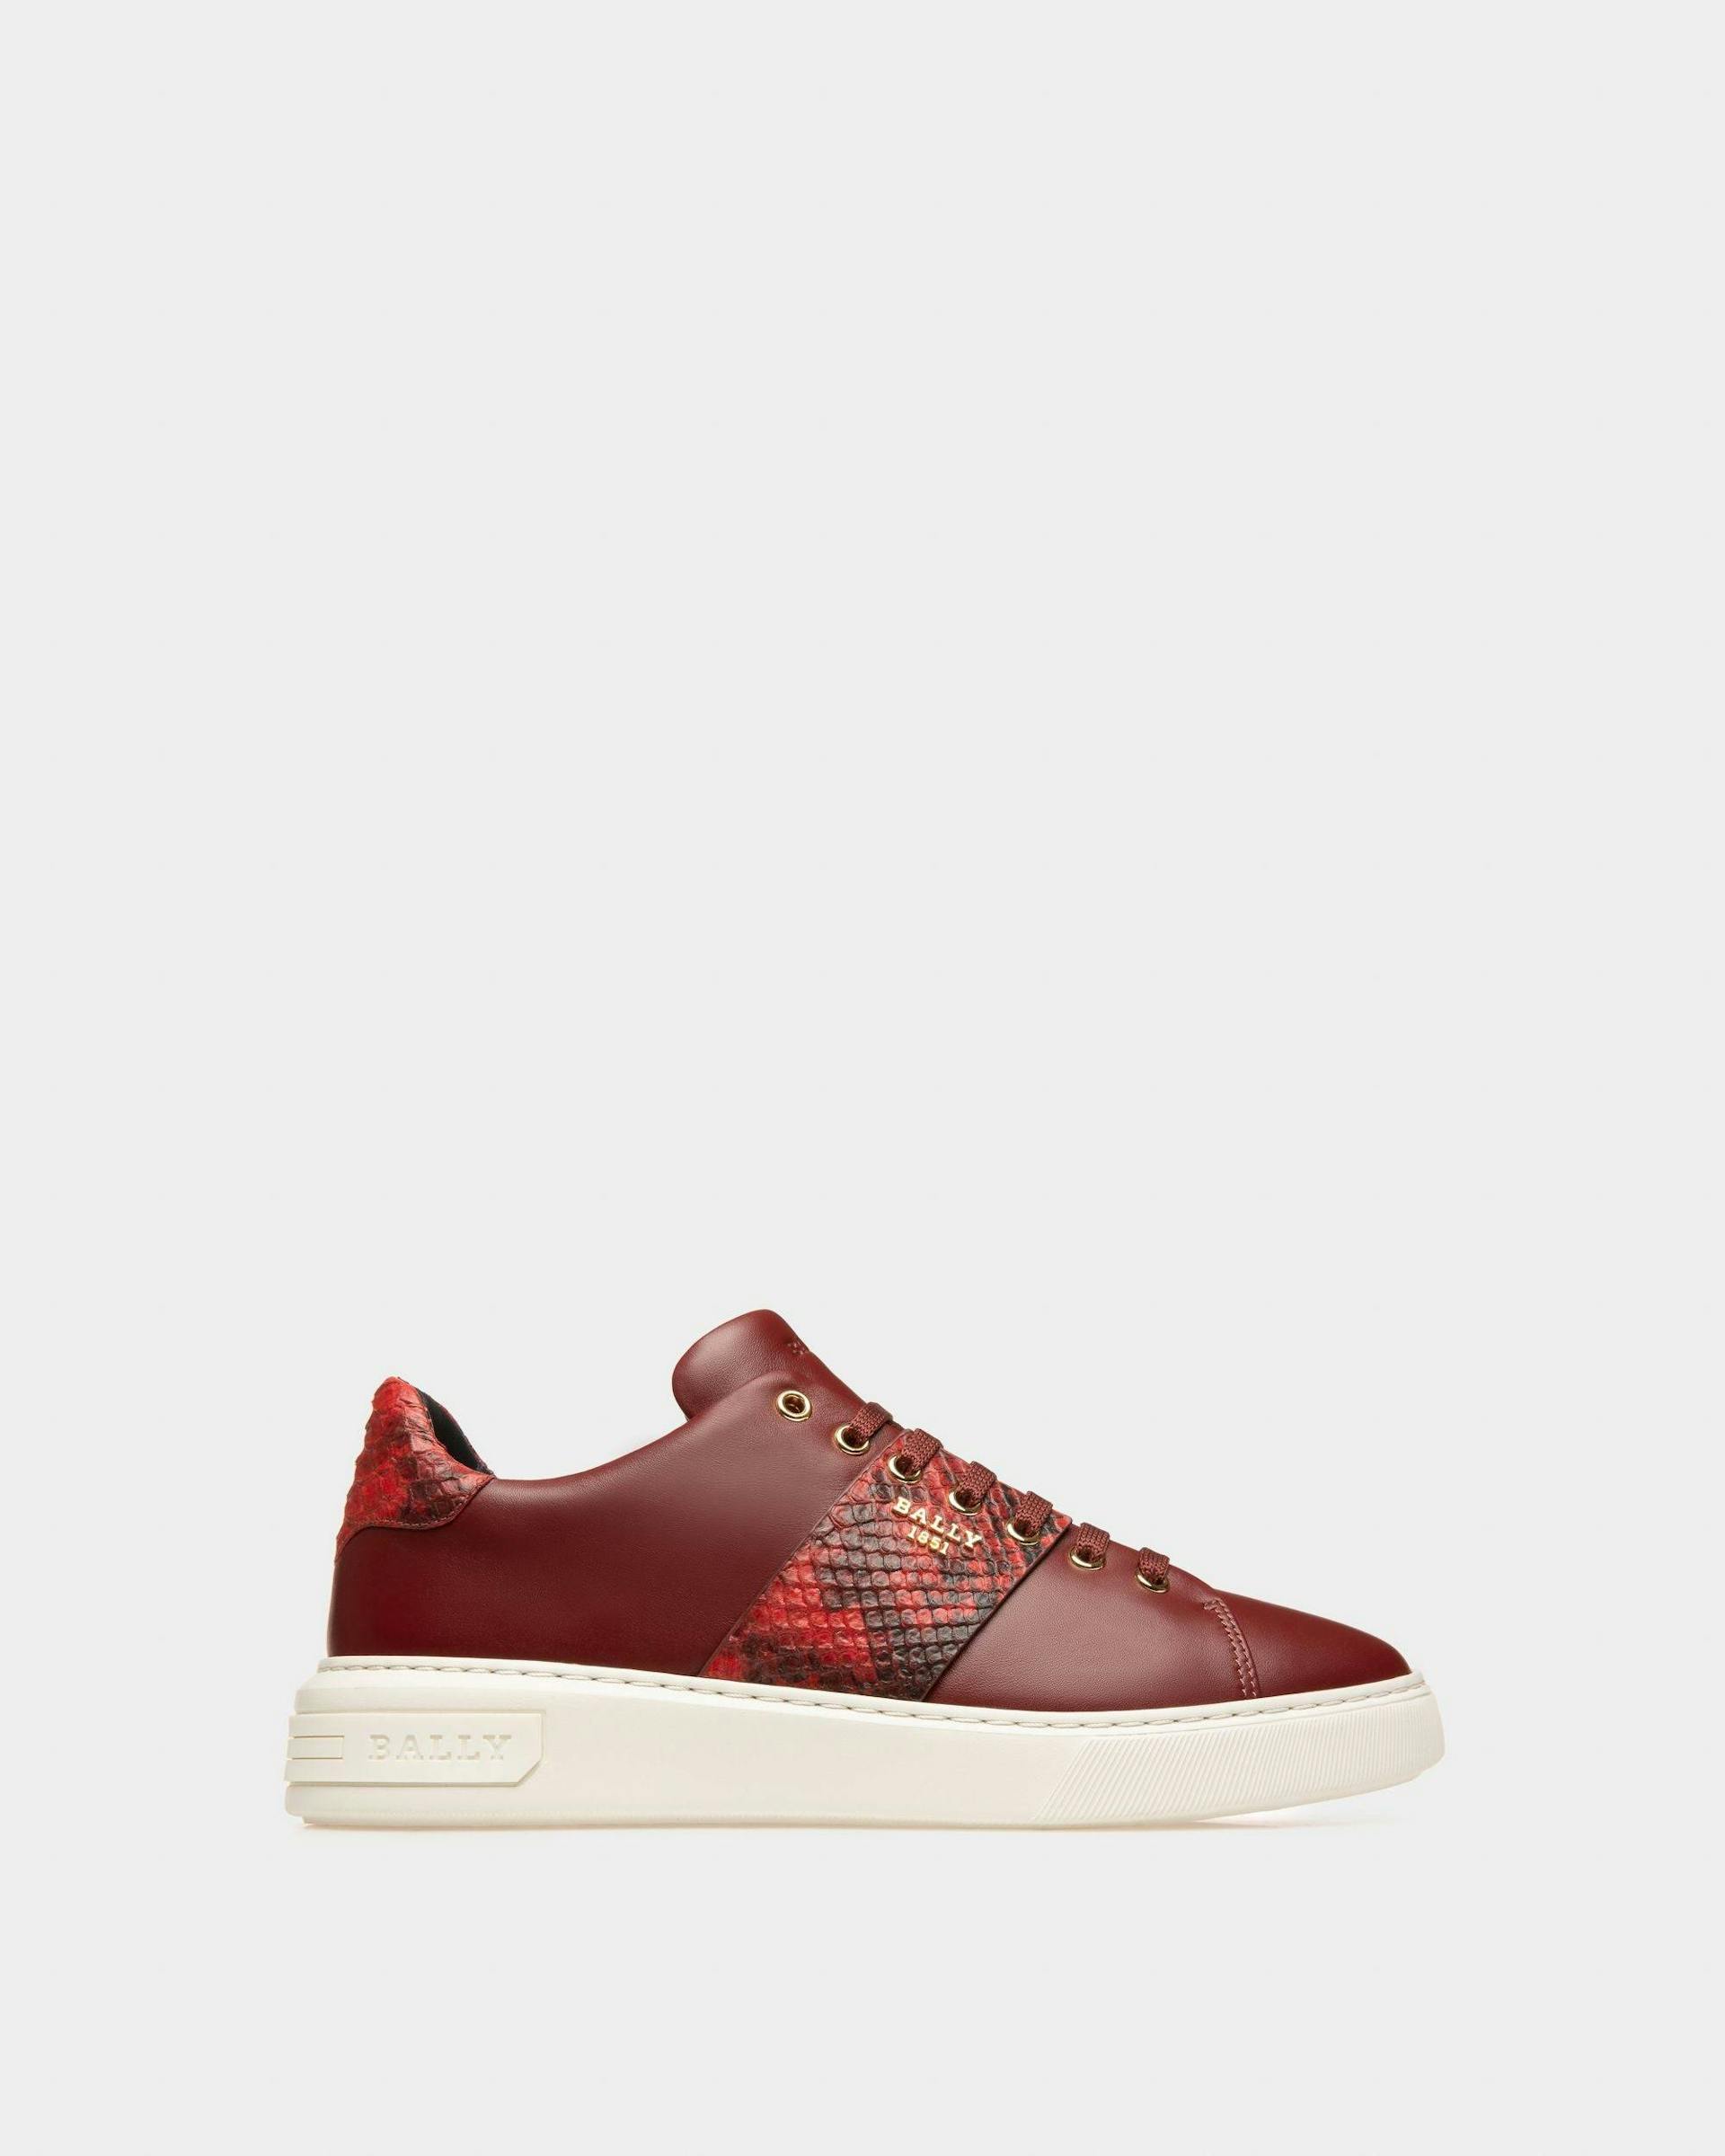 Mattye Leather Sneakers In Heritage Red - Men's - Bally - 01